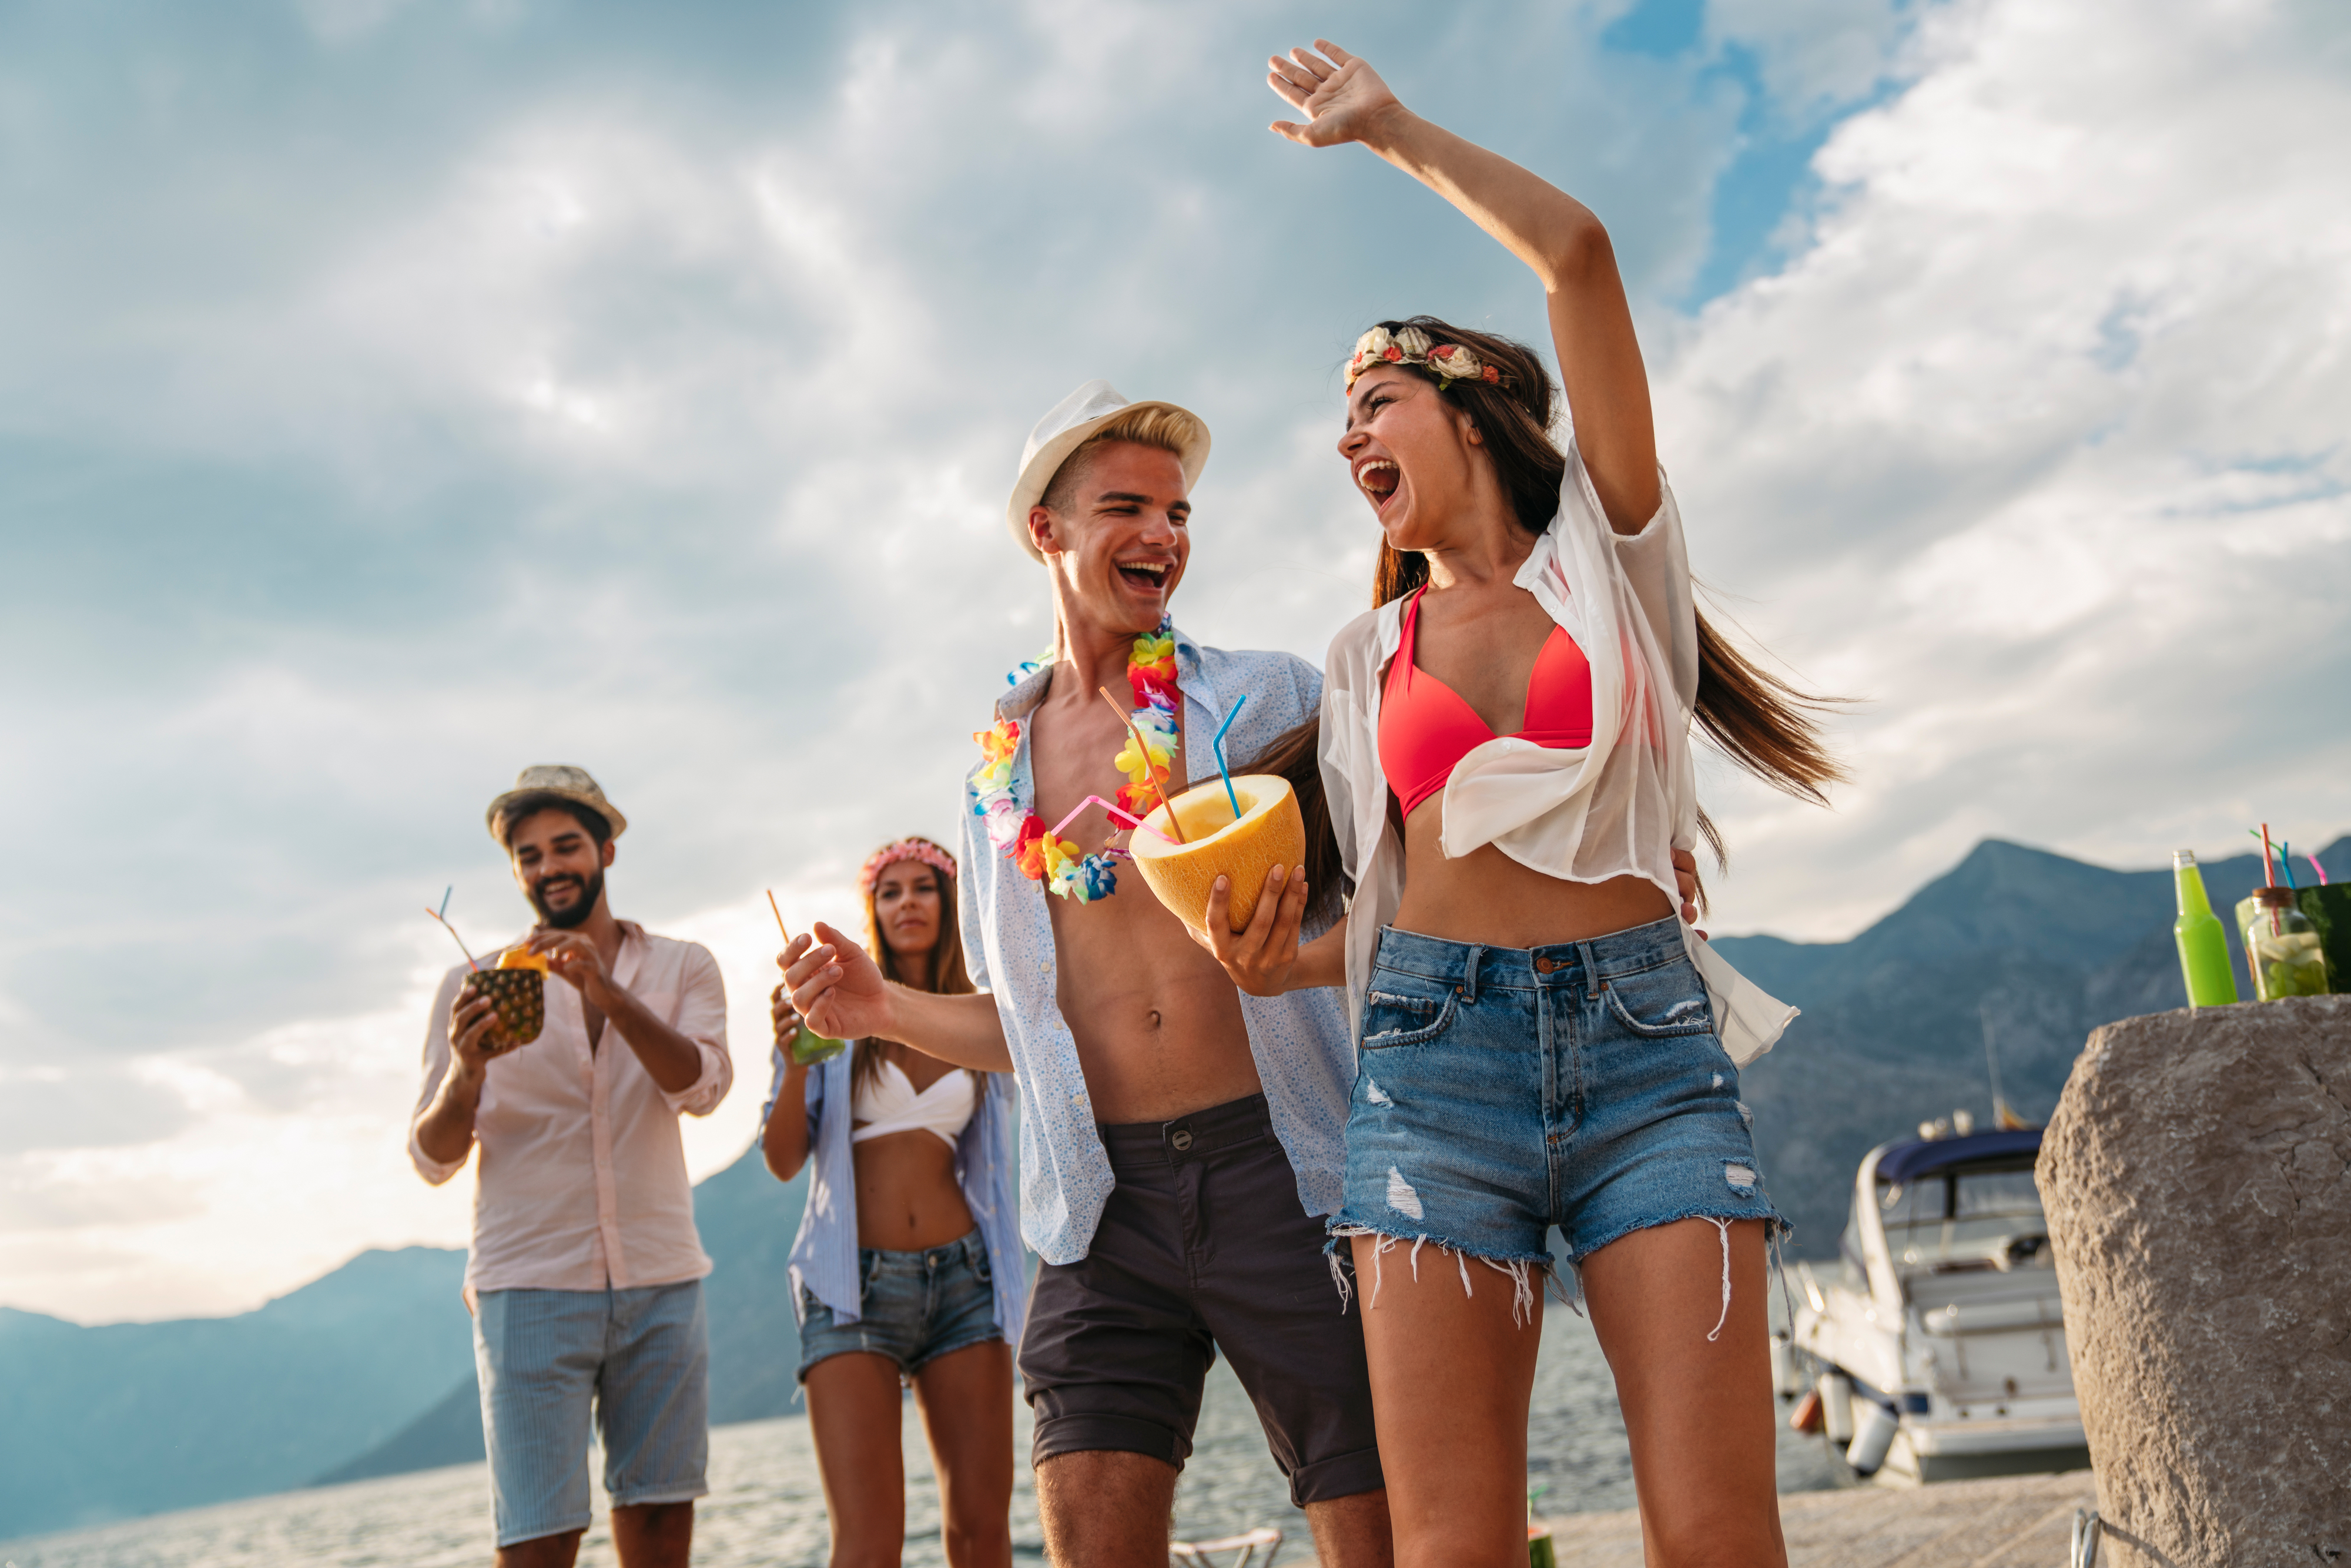 Group of friends enjoying a tropical vacation by the beach, wearing summer clothes, holding drinks, and dancing with a boat and mountains in the background